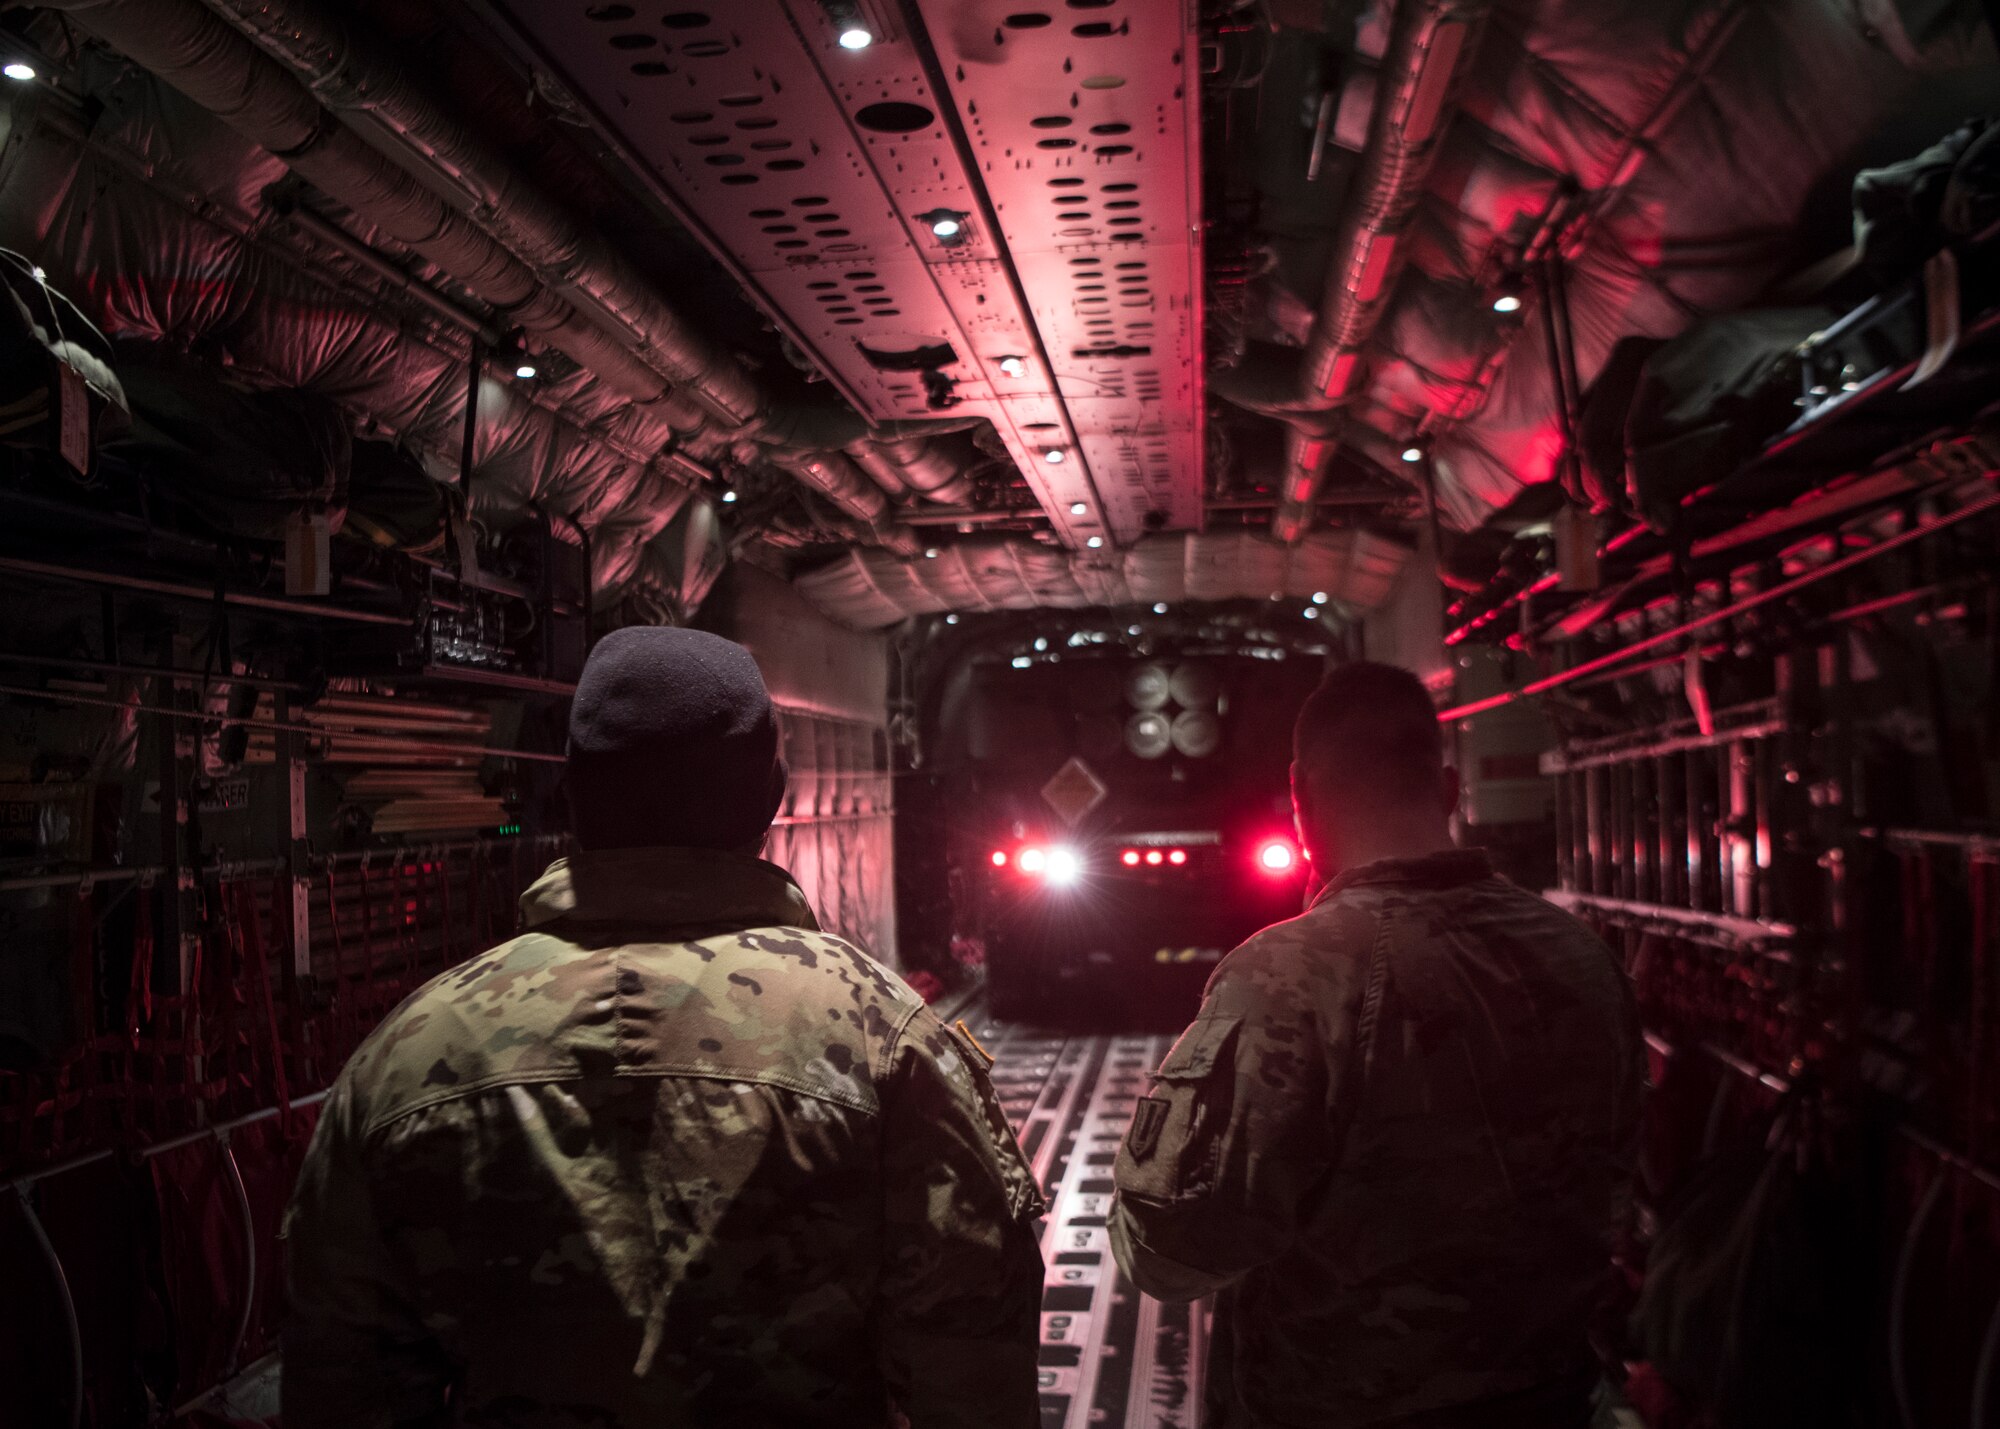 Members of the 37th Airlift Squadron and 41st Field Artillery Brigade worked together to load and transport a High Mobility Artillery Rocket System for exercise Rapid Falcon.